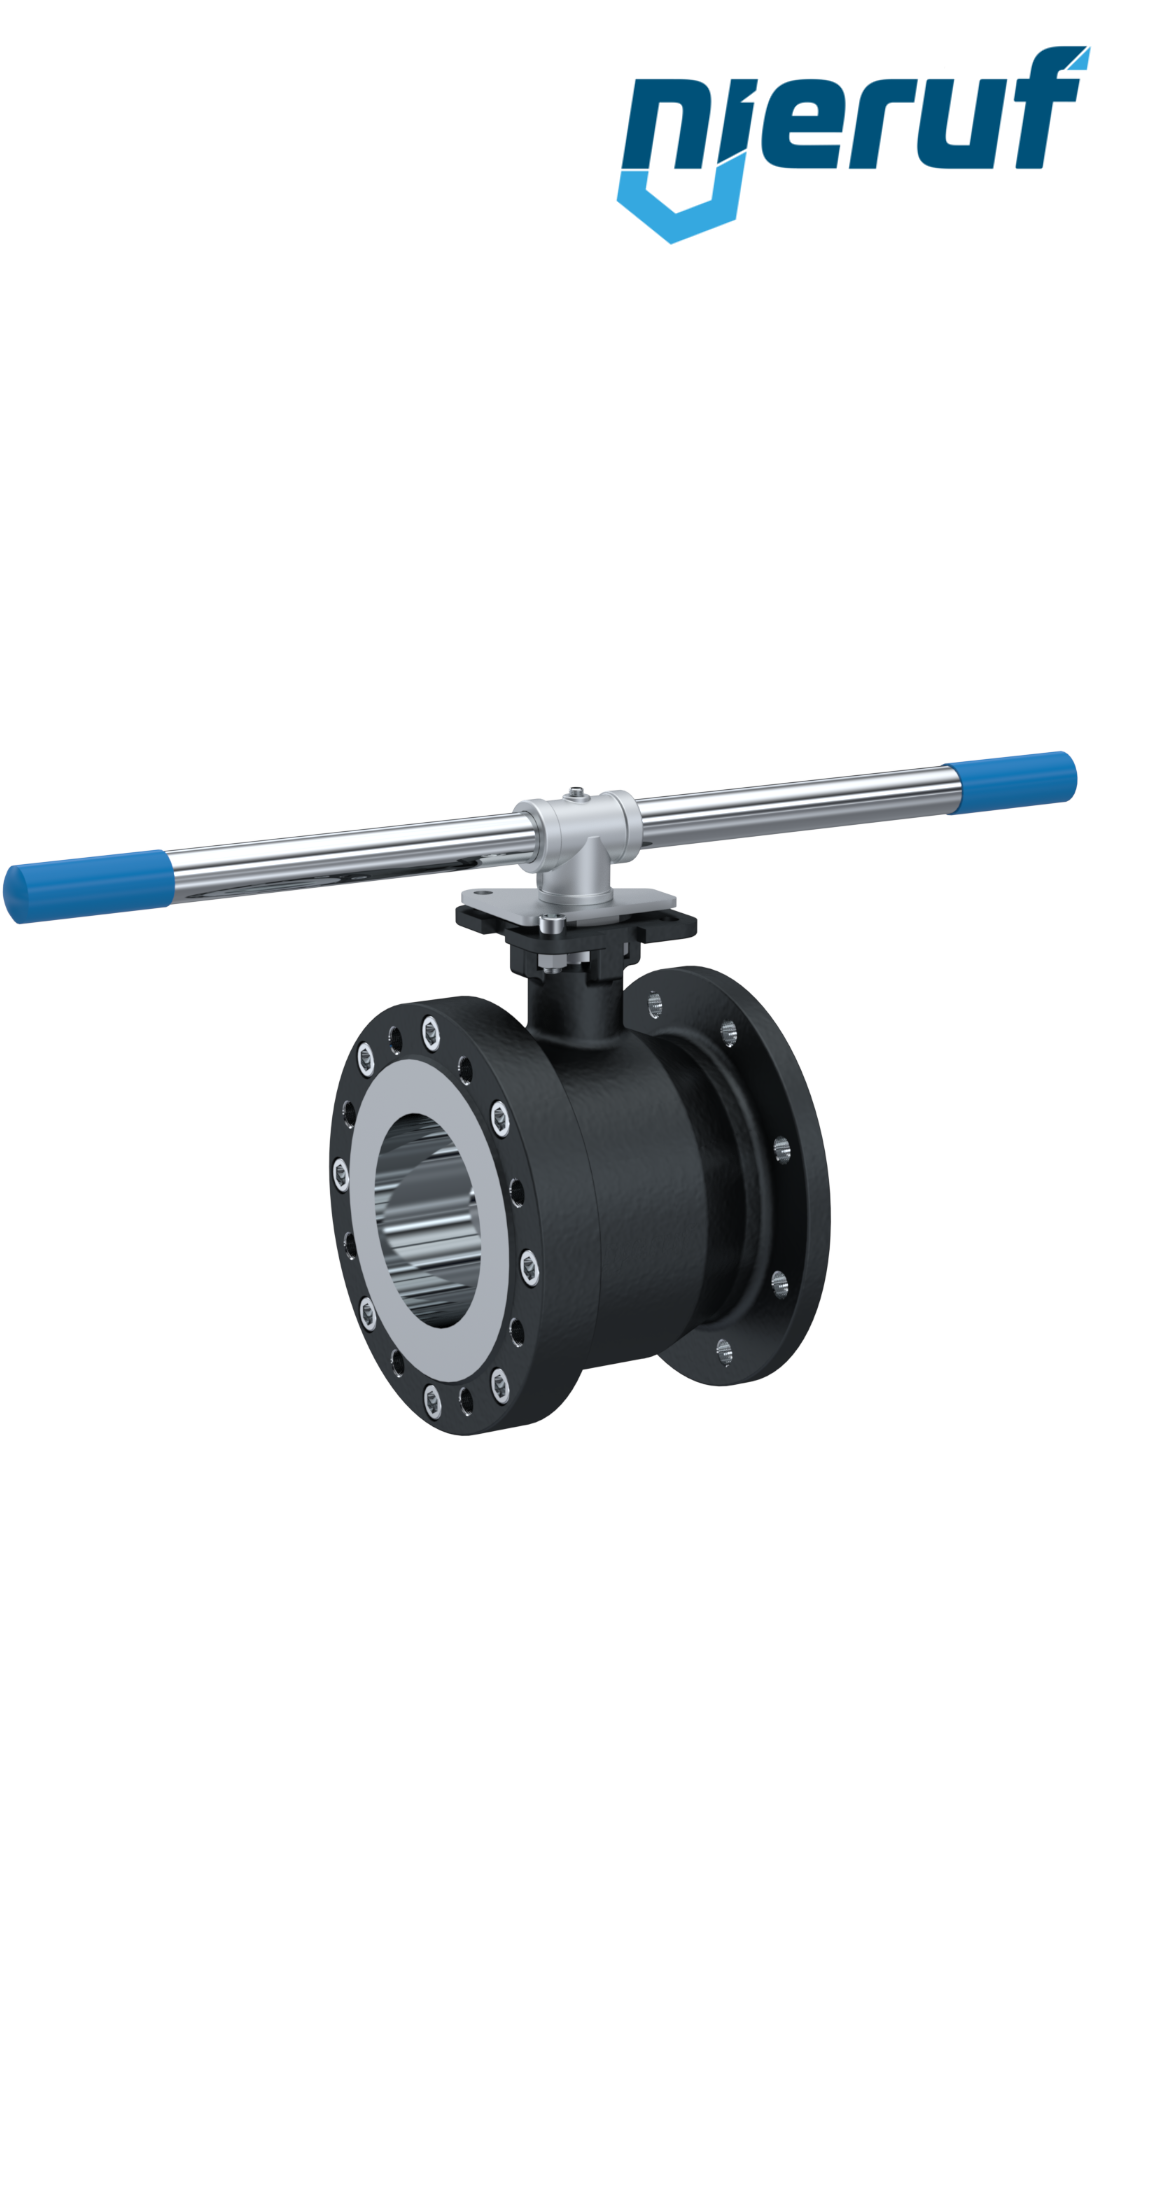 Compact ball valve DN150 PN16 FK03 carbon steel 1.0619 ball stainless steel 1.4408